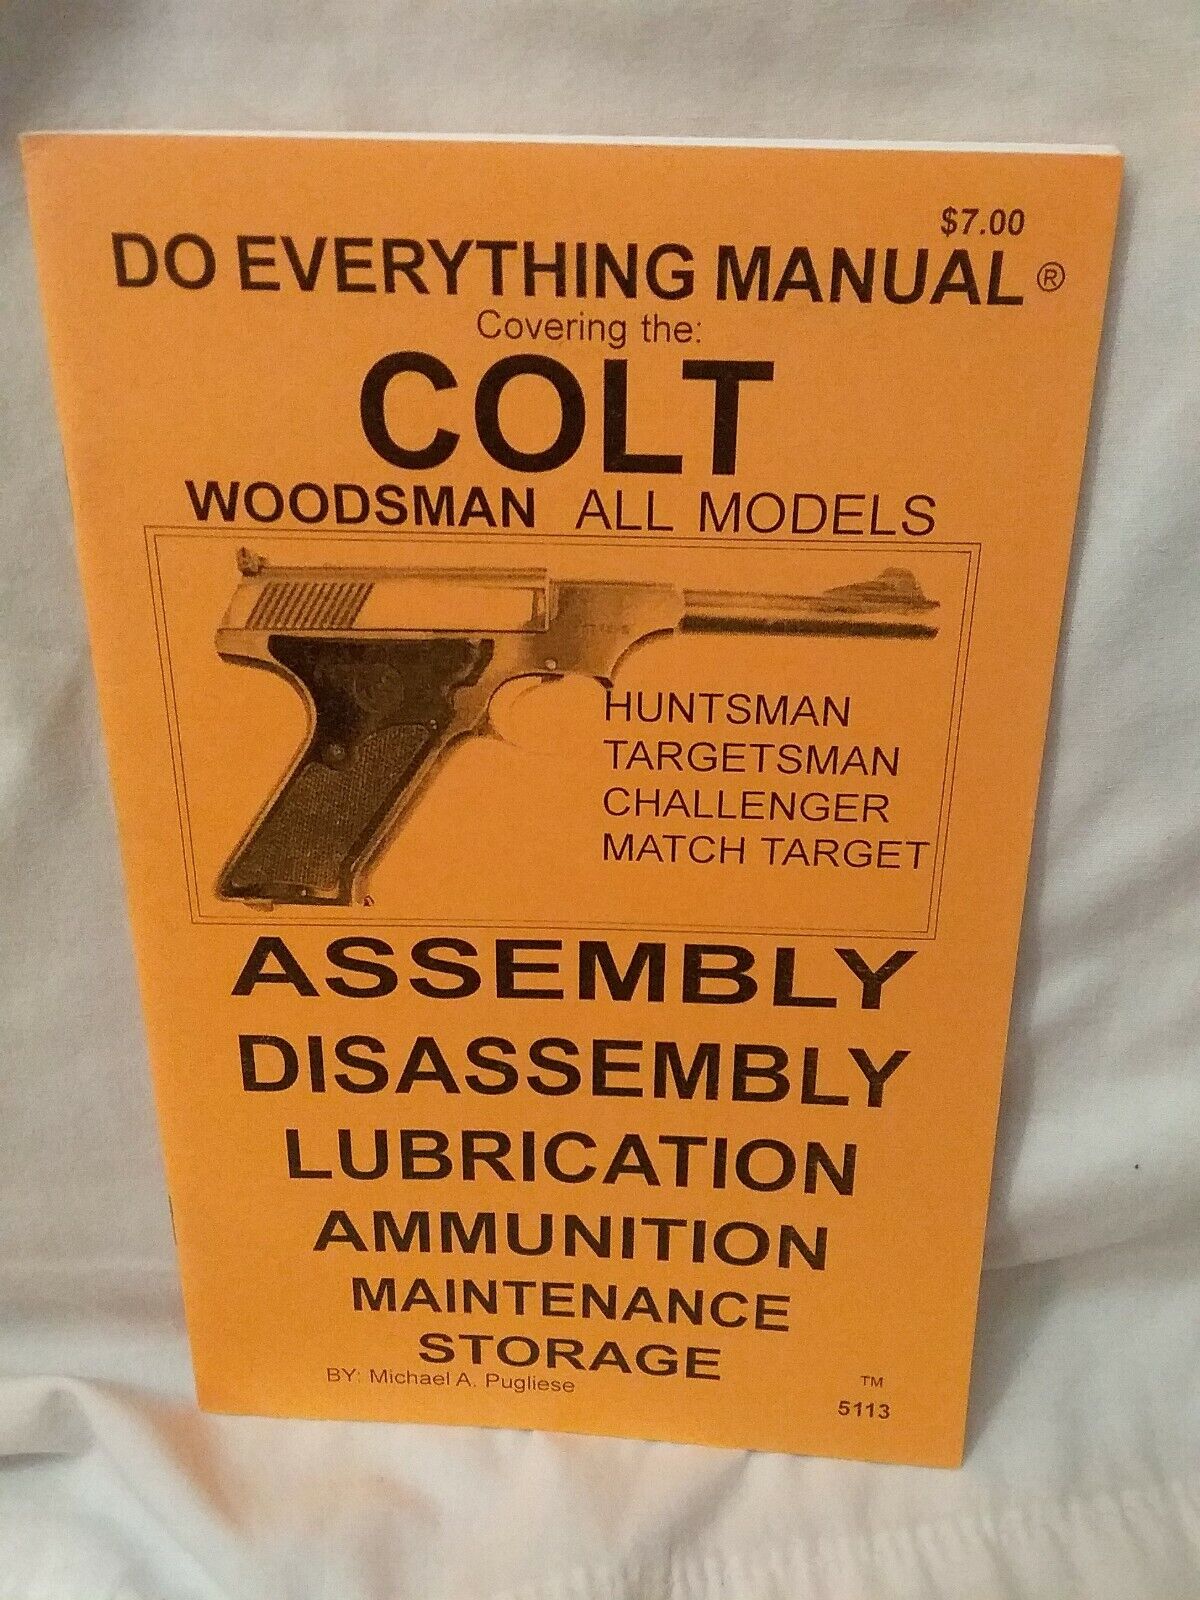 Do Everything Manual Covering The Super beauty Safety and trust product restock quality top All Colt Woodsman Models